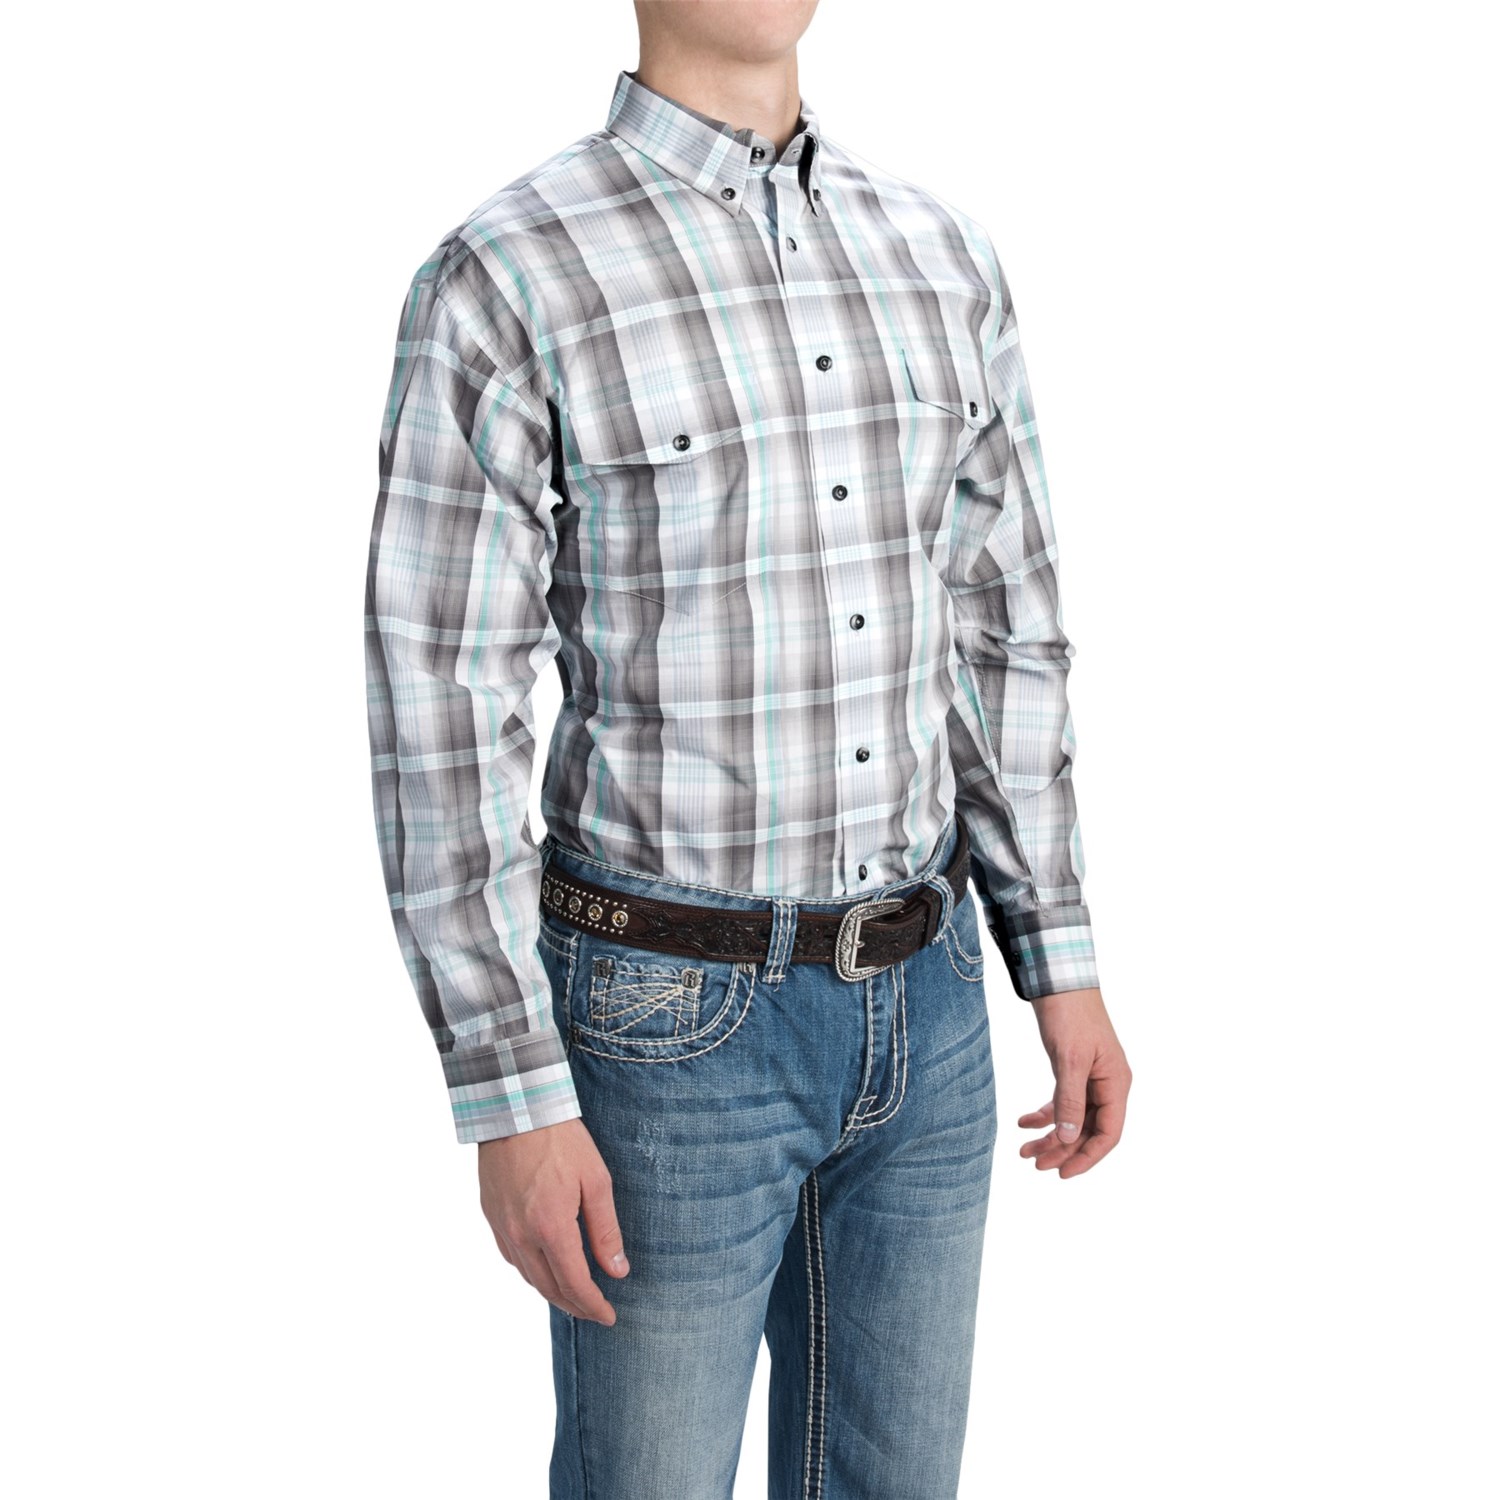 Panhandle Slim Country Plaid Western Shirt (For Men) - Save 41%